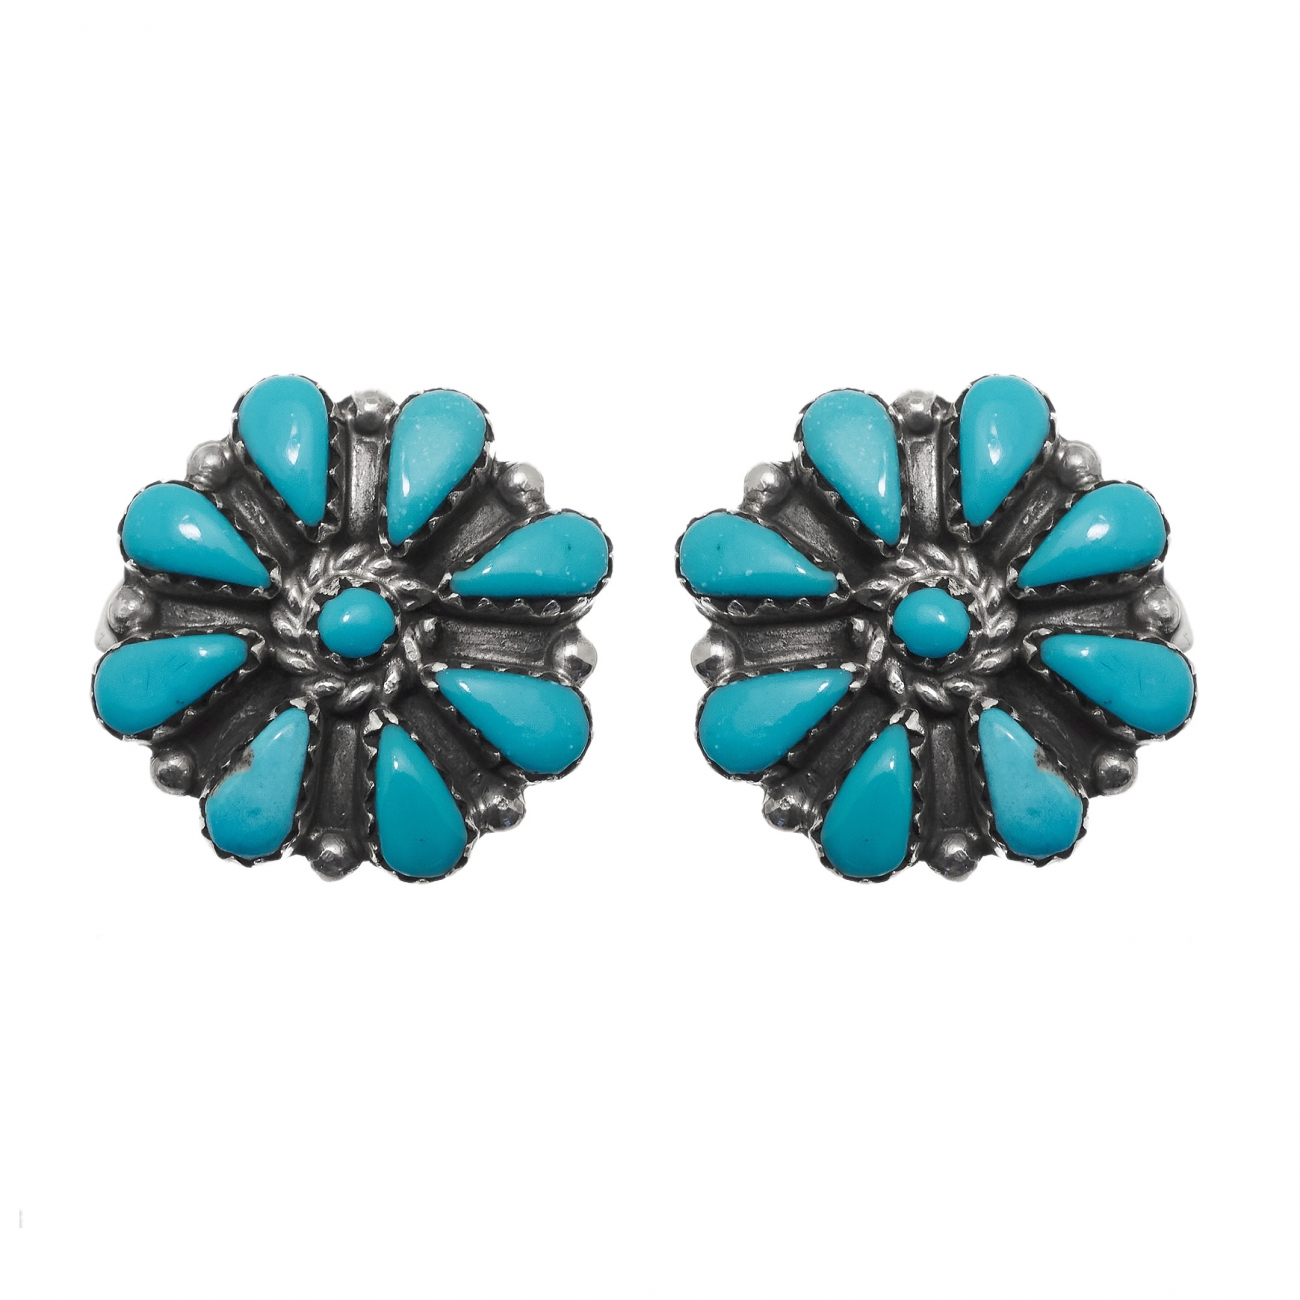 Harpo Paris earrings BO311 flowers in turquoise and silver